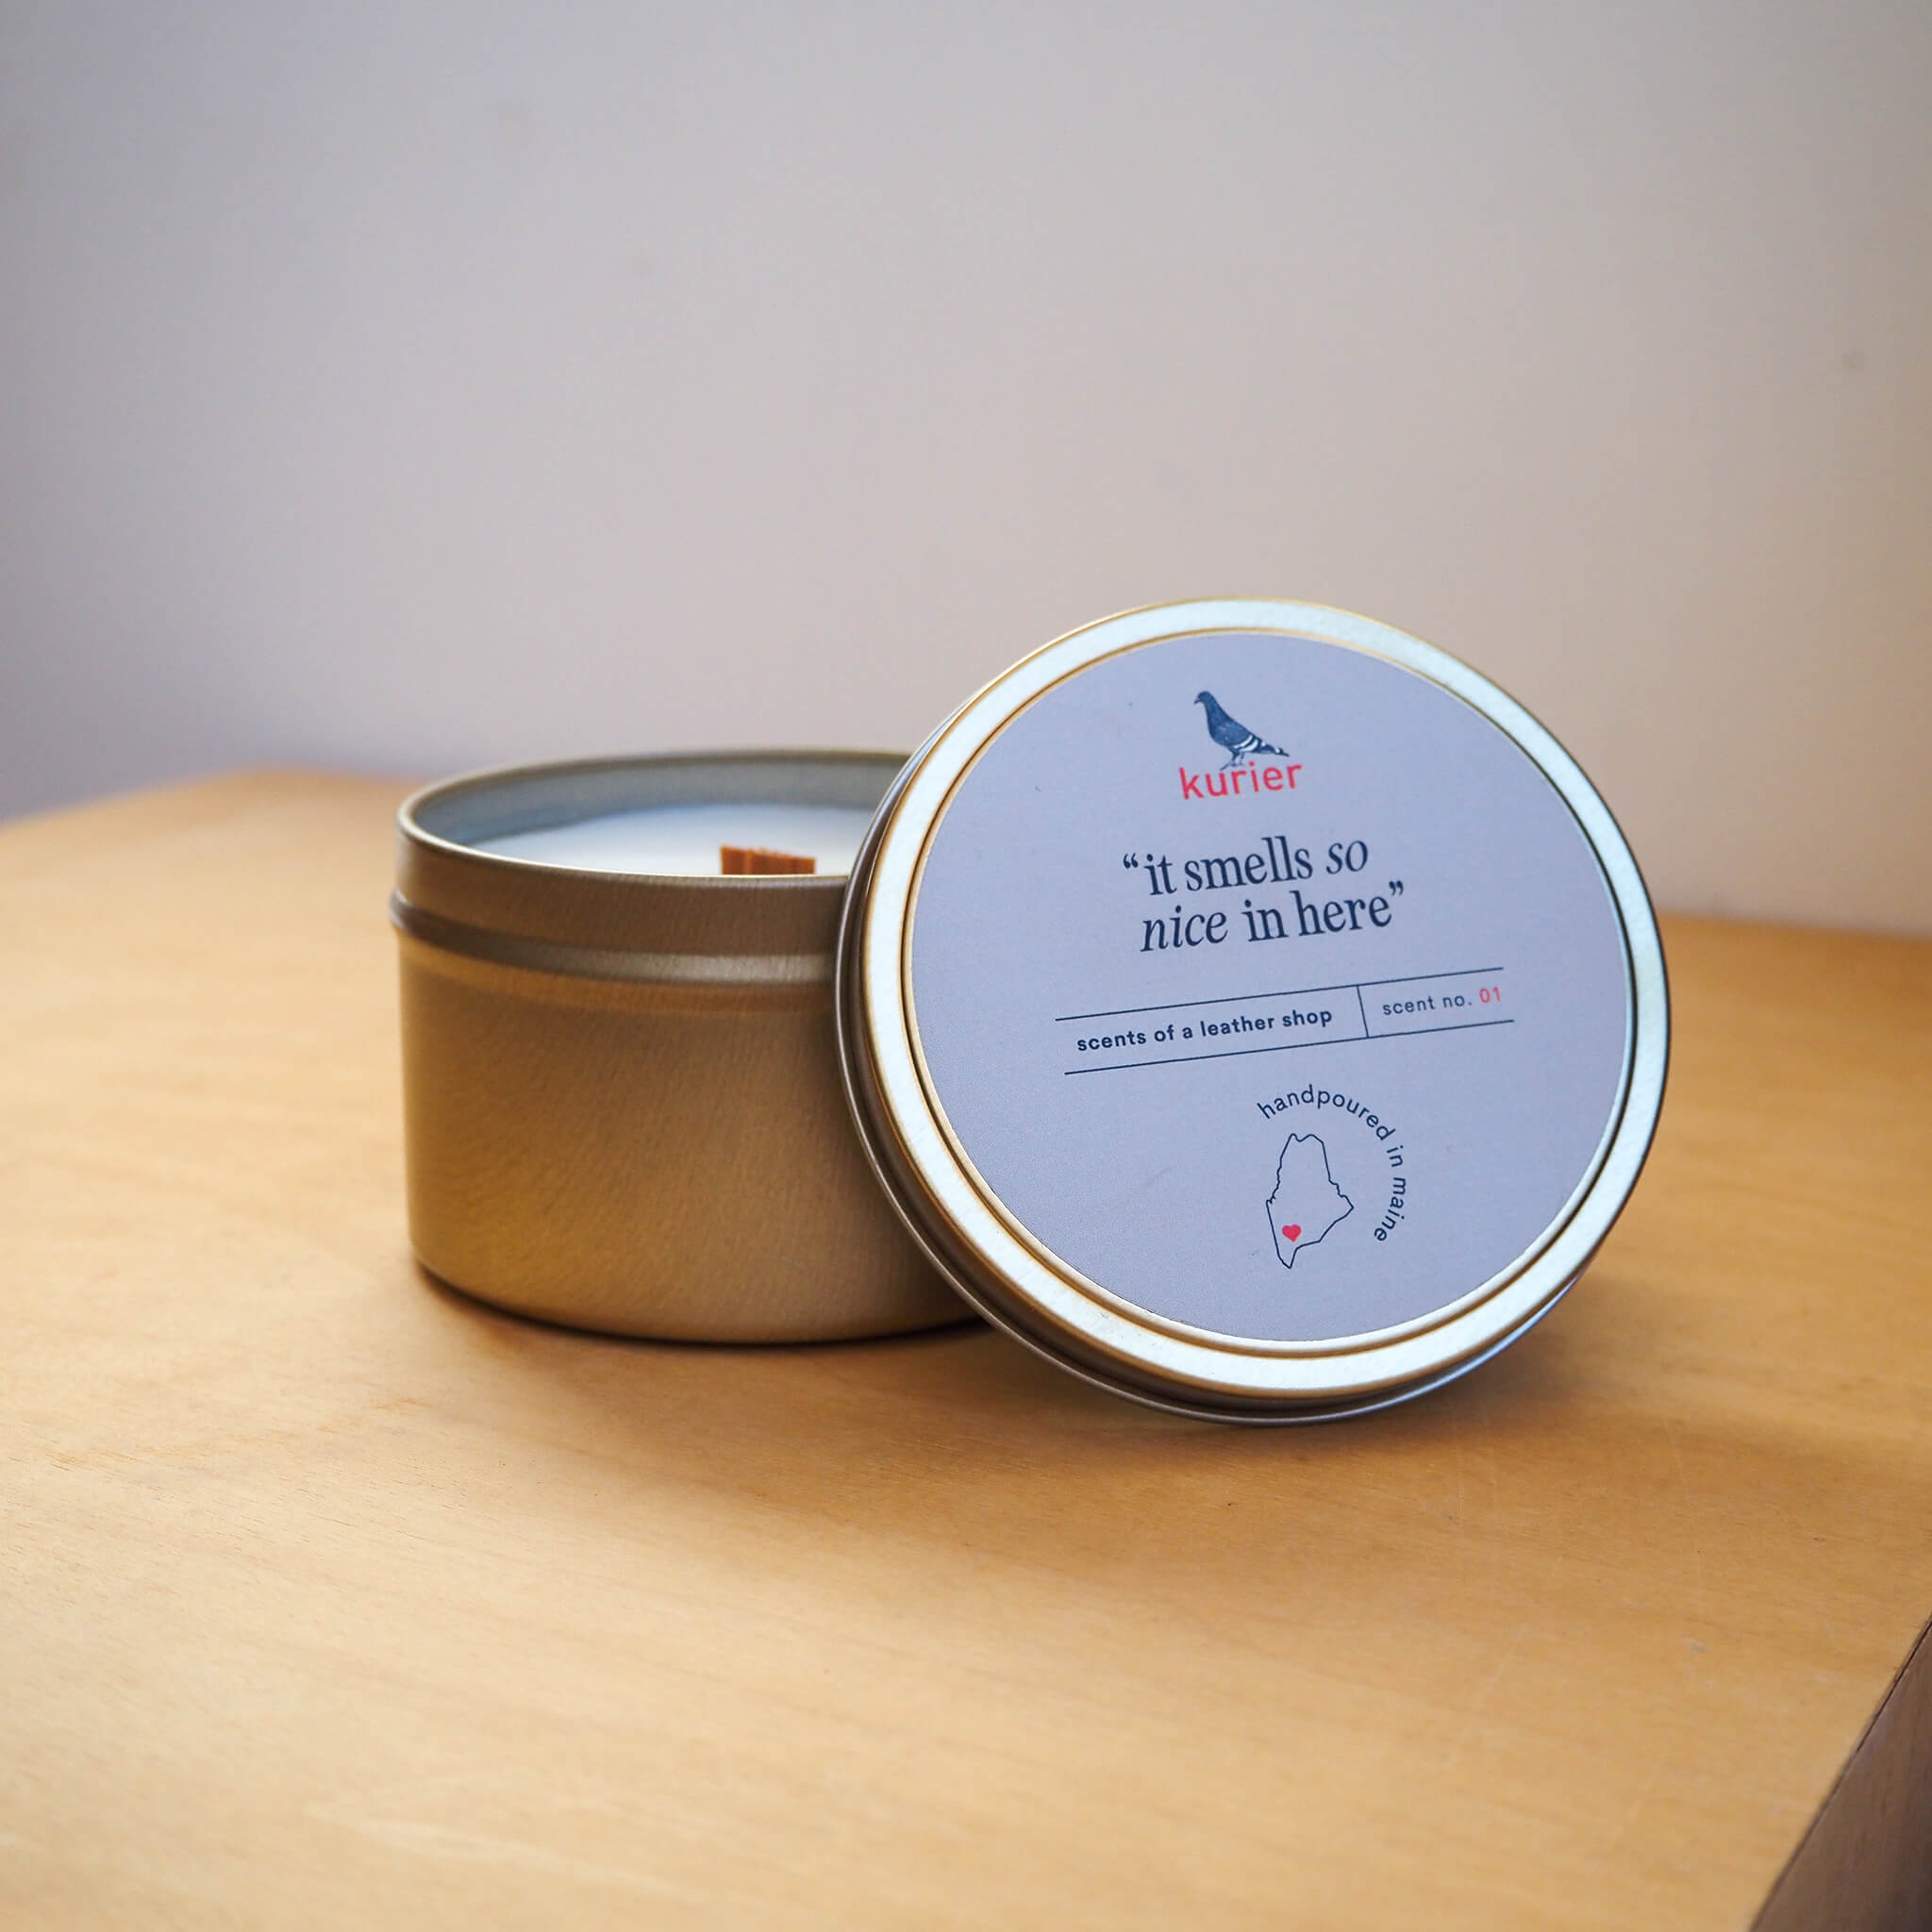 kurier's signature scented goods - tin candle - "it smells so nice in here"